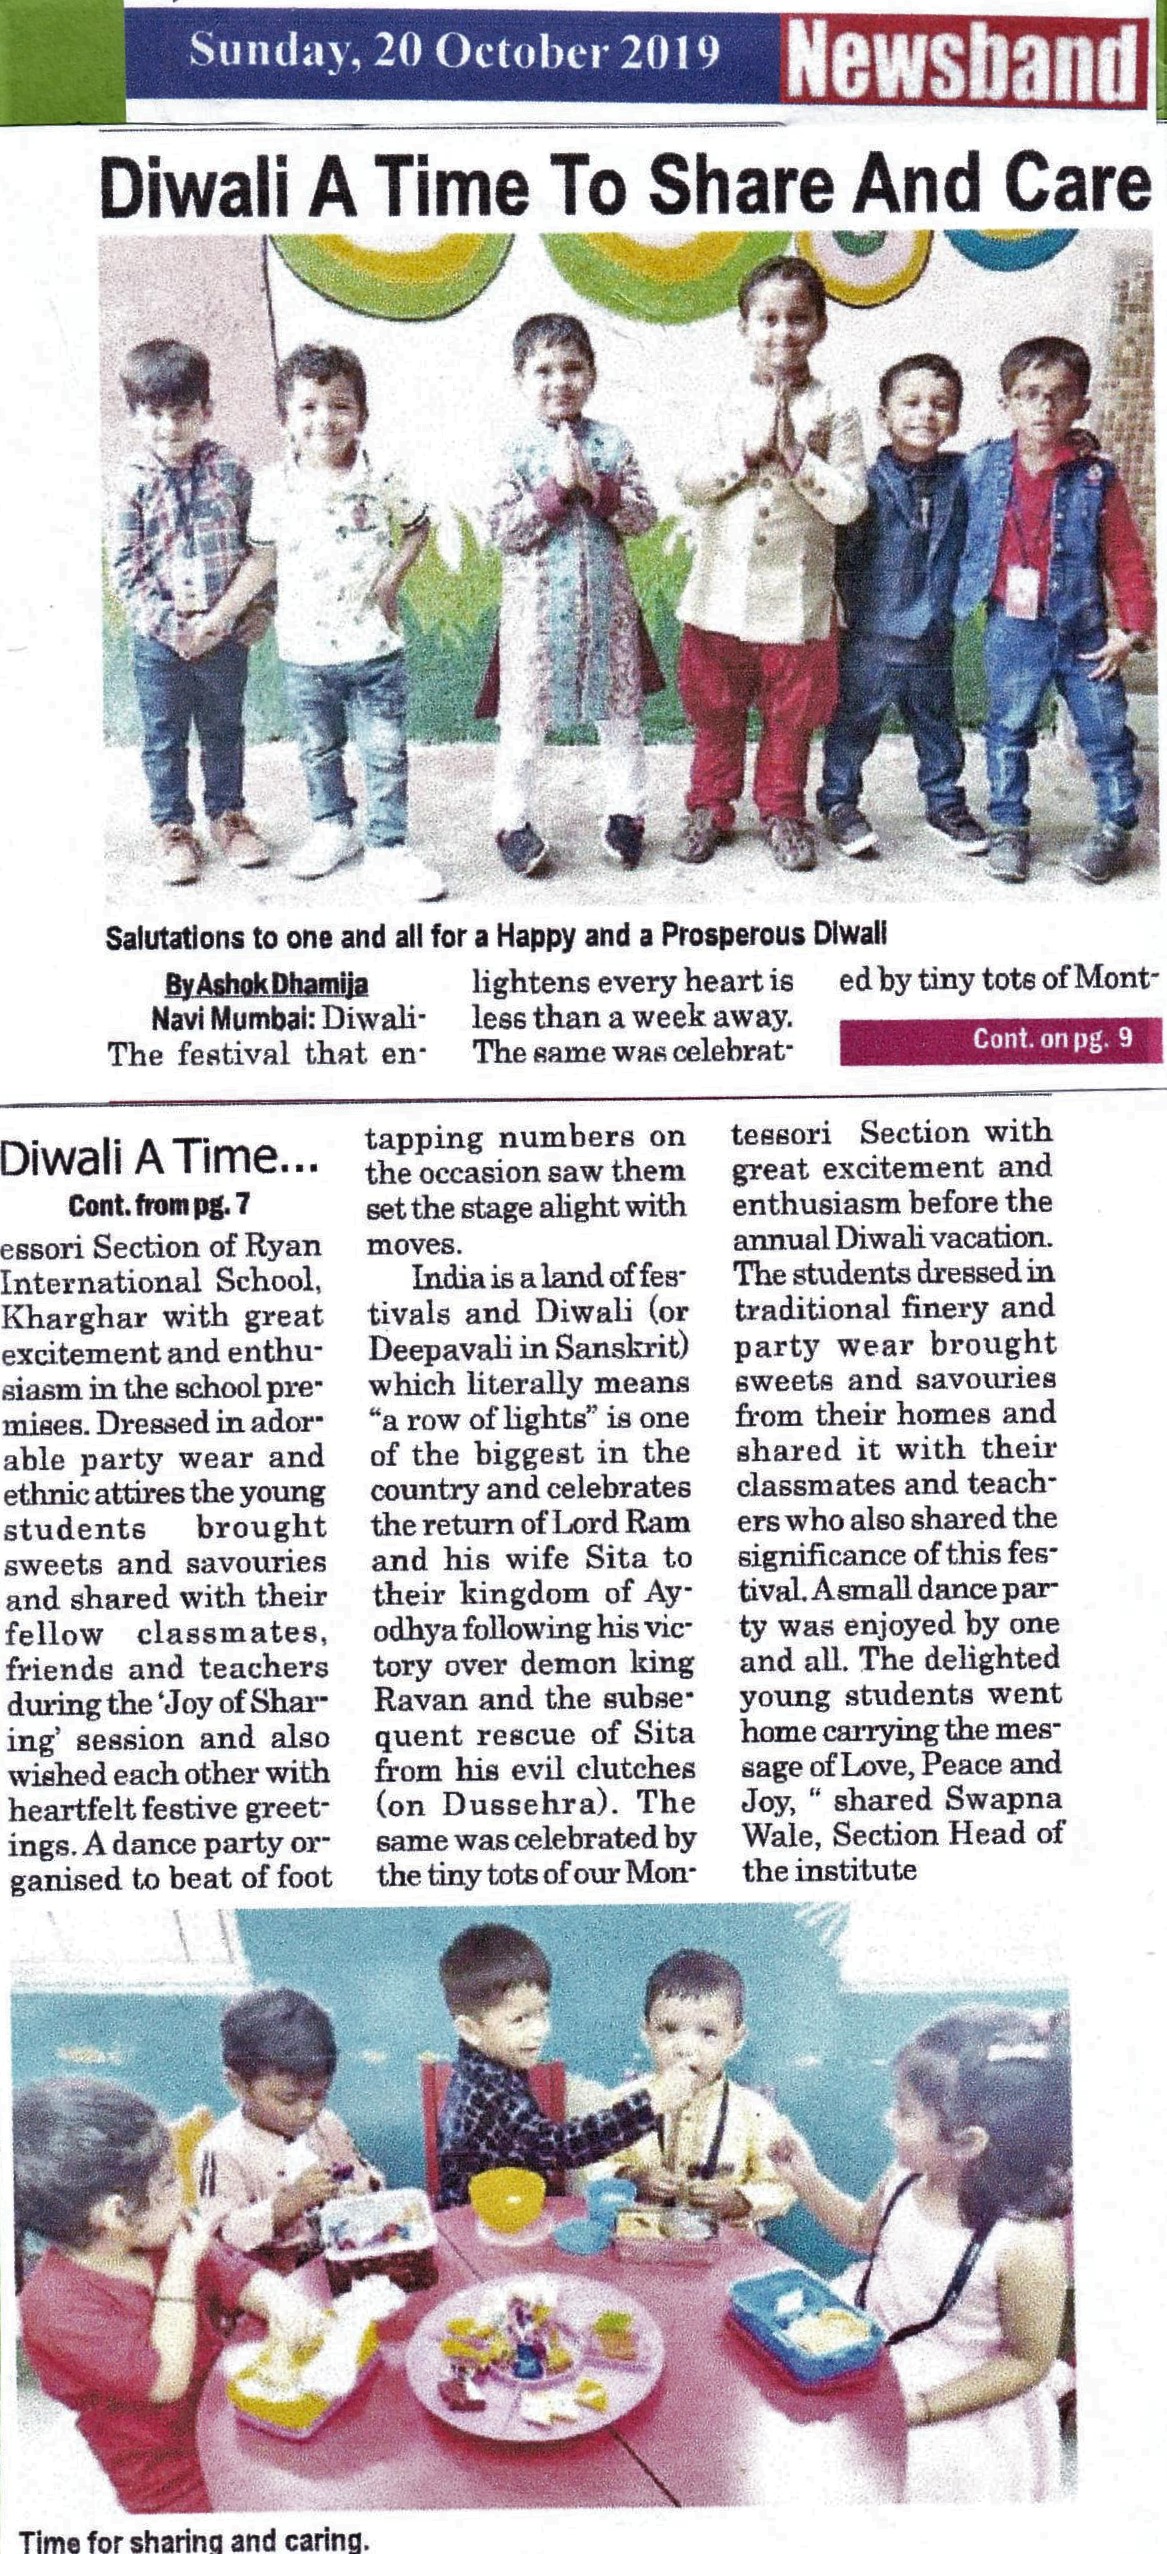 Diwali a time to share and care was mentioned in News band - Ryan International School, Kharghar - Ryan Group